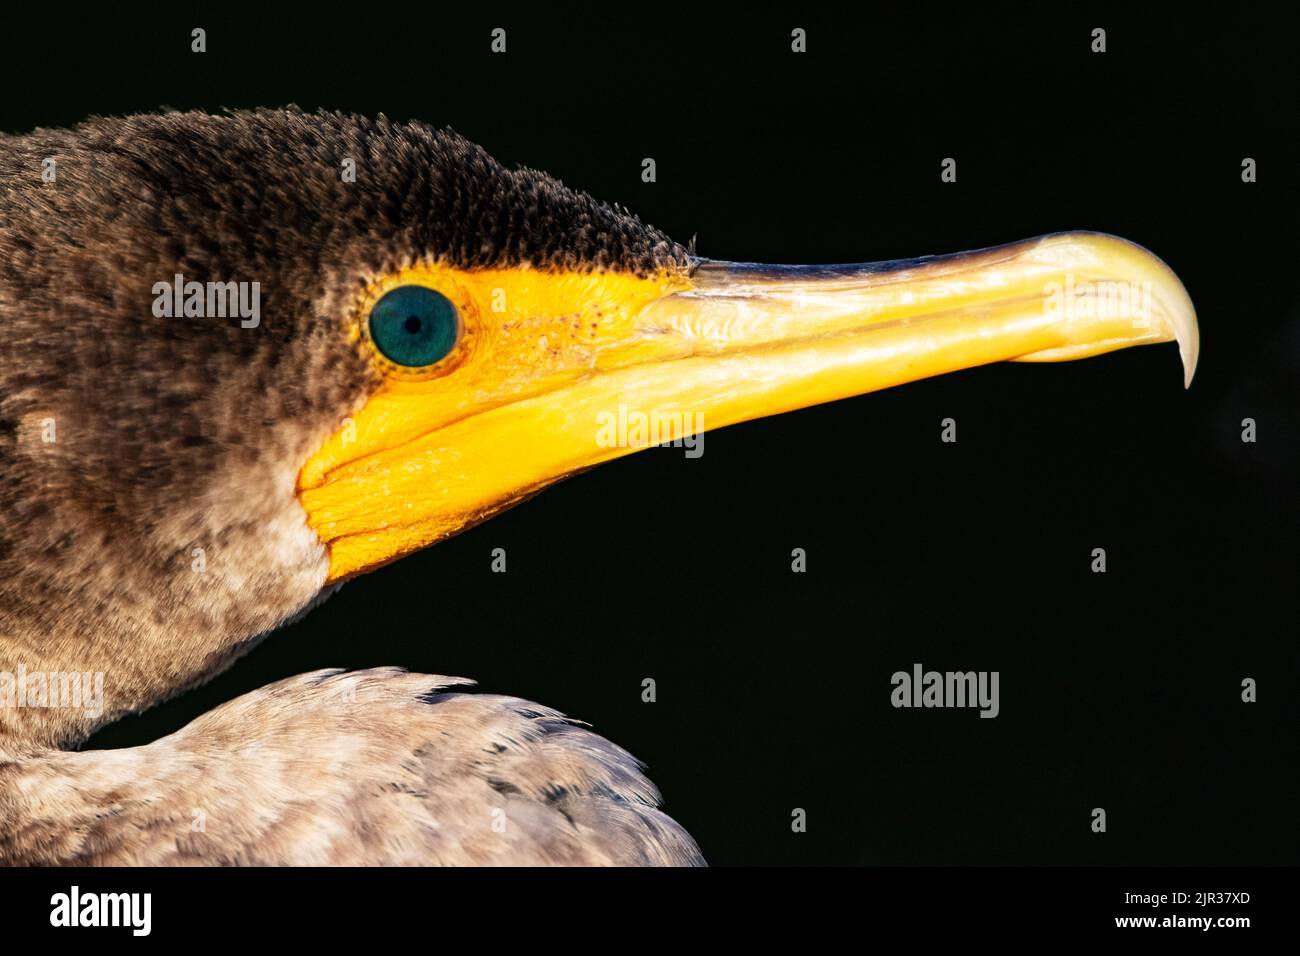 Lovely blue-teal aquamarine color of Double crested cormorant's eye and golden yellow hooked beak in close up portrait in Delray Beach, Florida, Unite Stock Photo